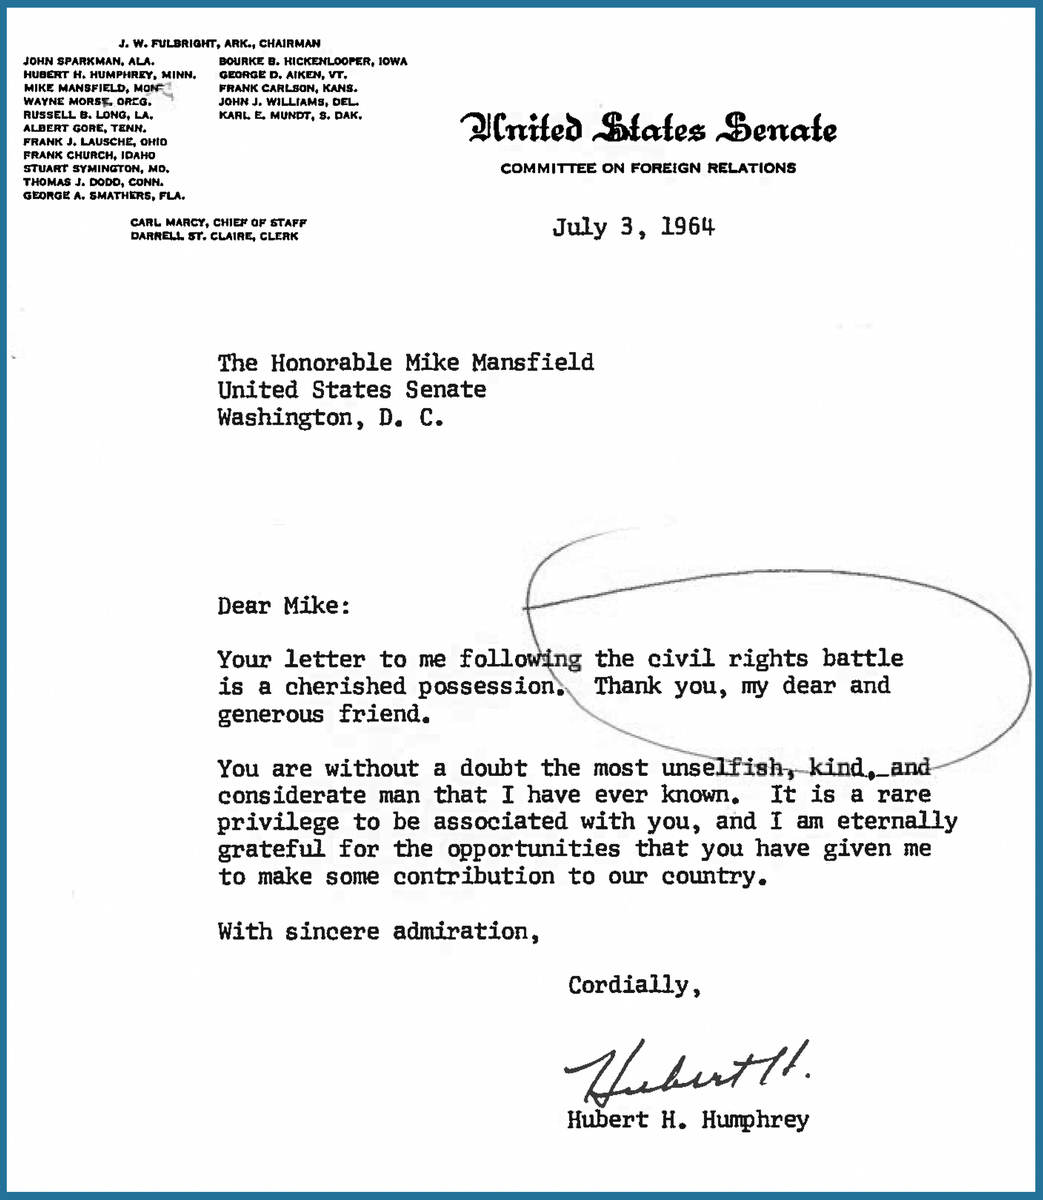 Senator Hubert Humphrey's letter about the Civil Rights Act